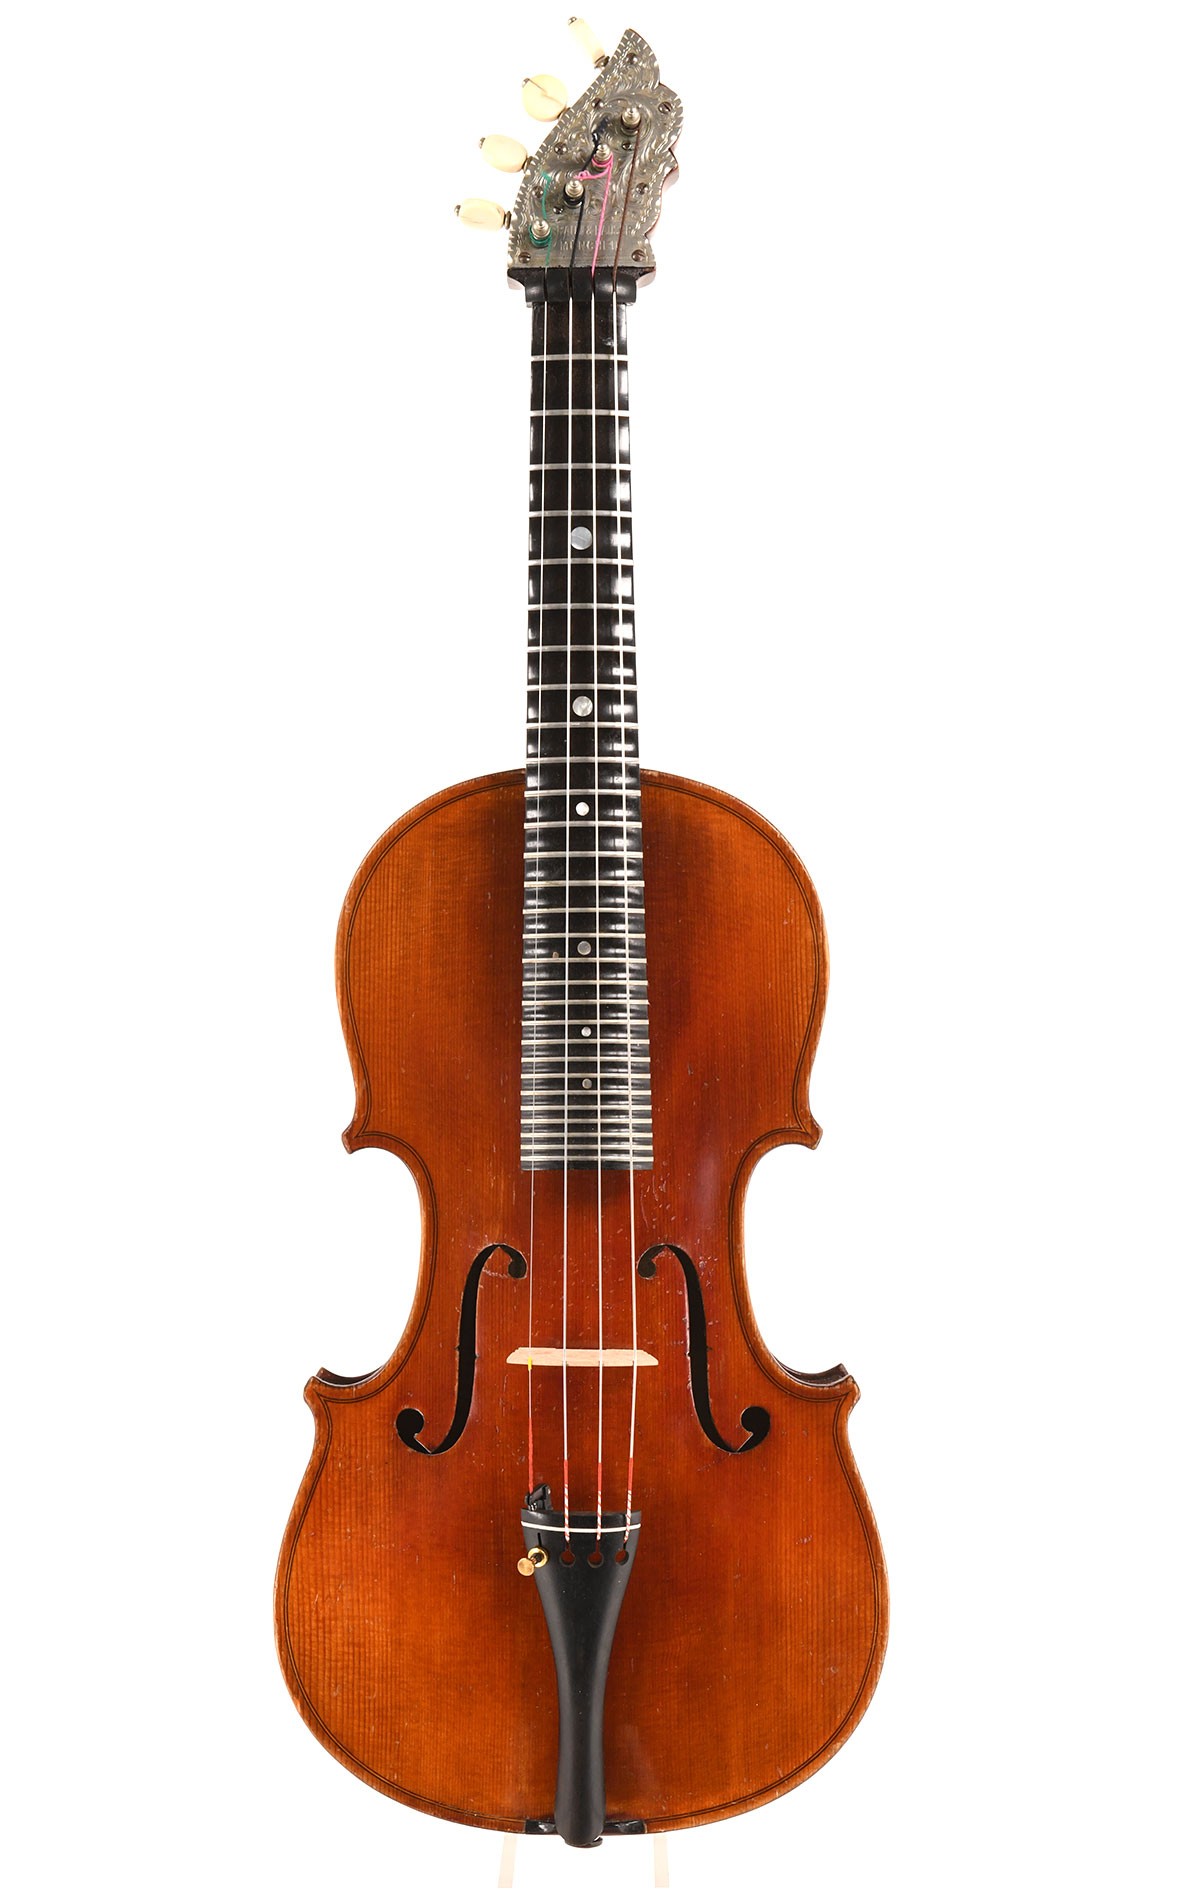 Lap violin (bowed zither) by Braun & Hauser, München c.1916